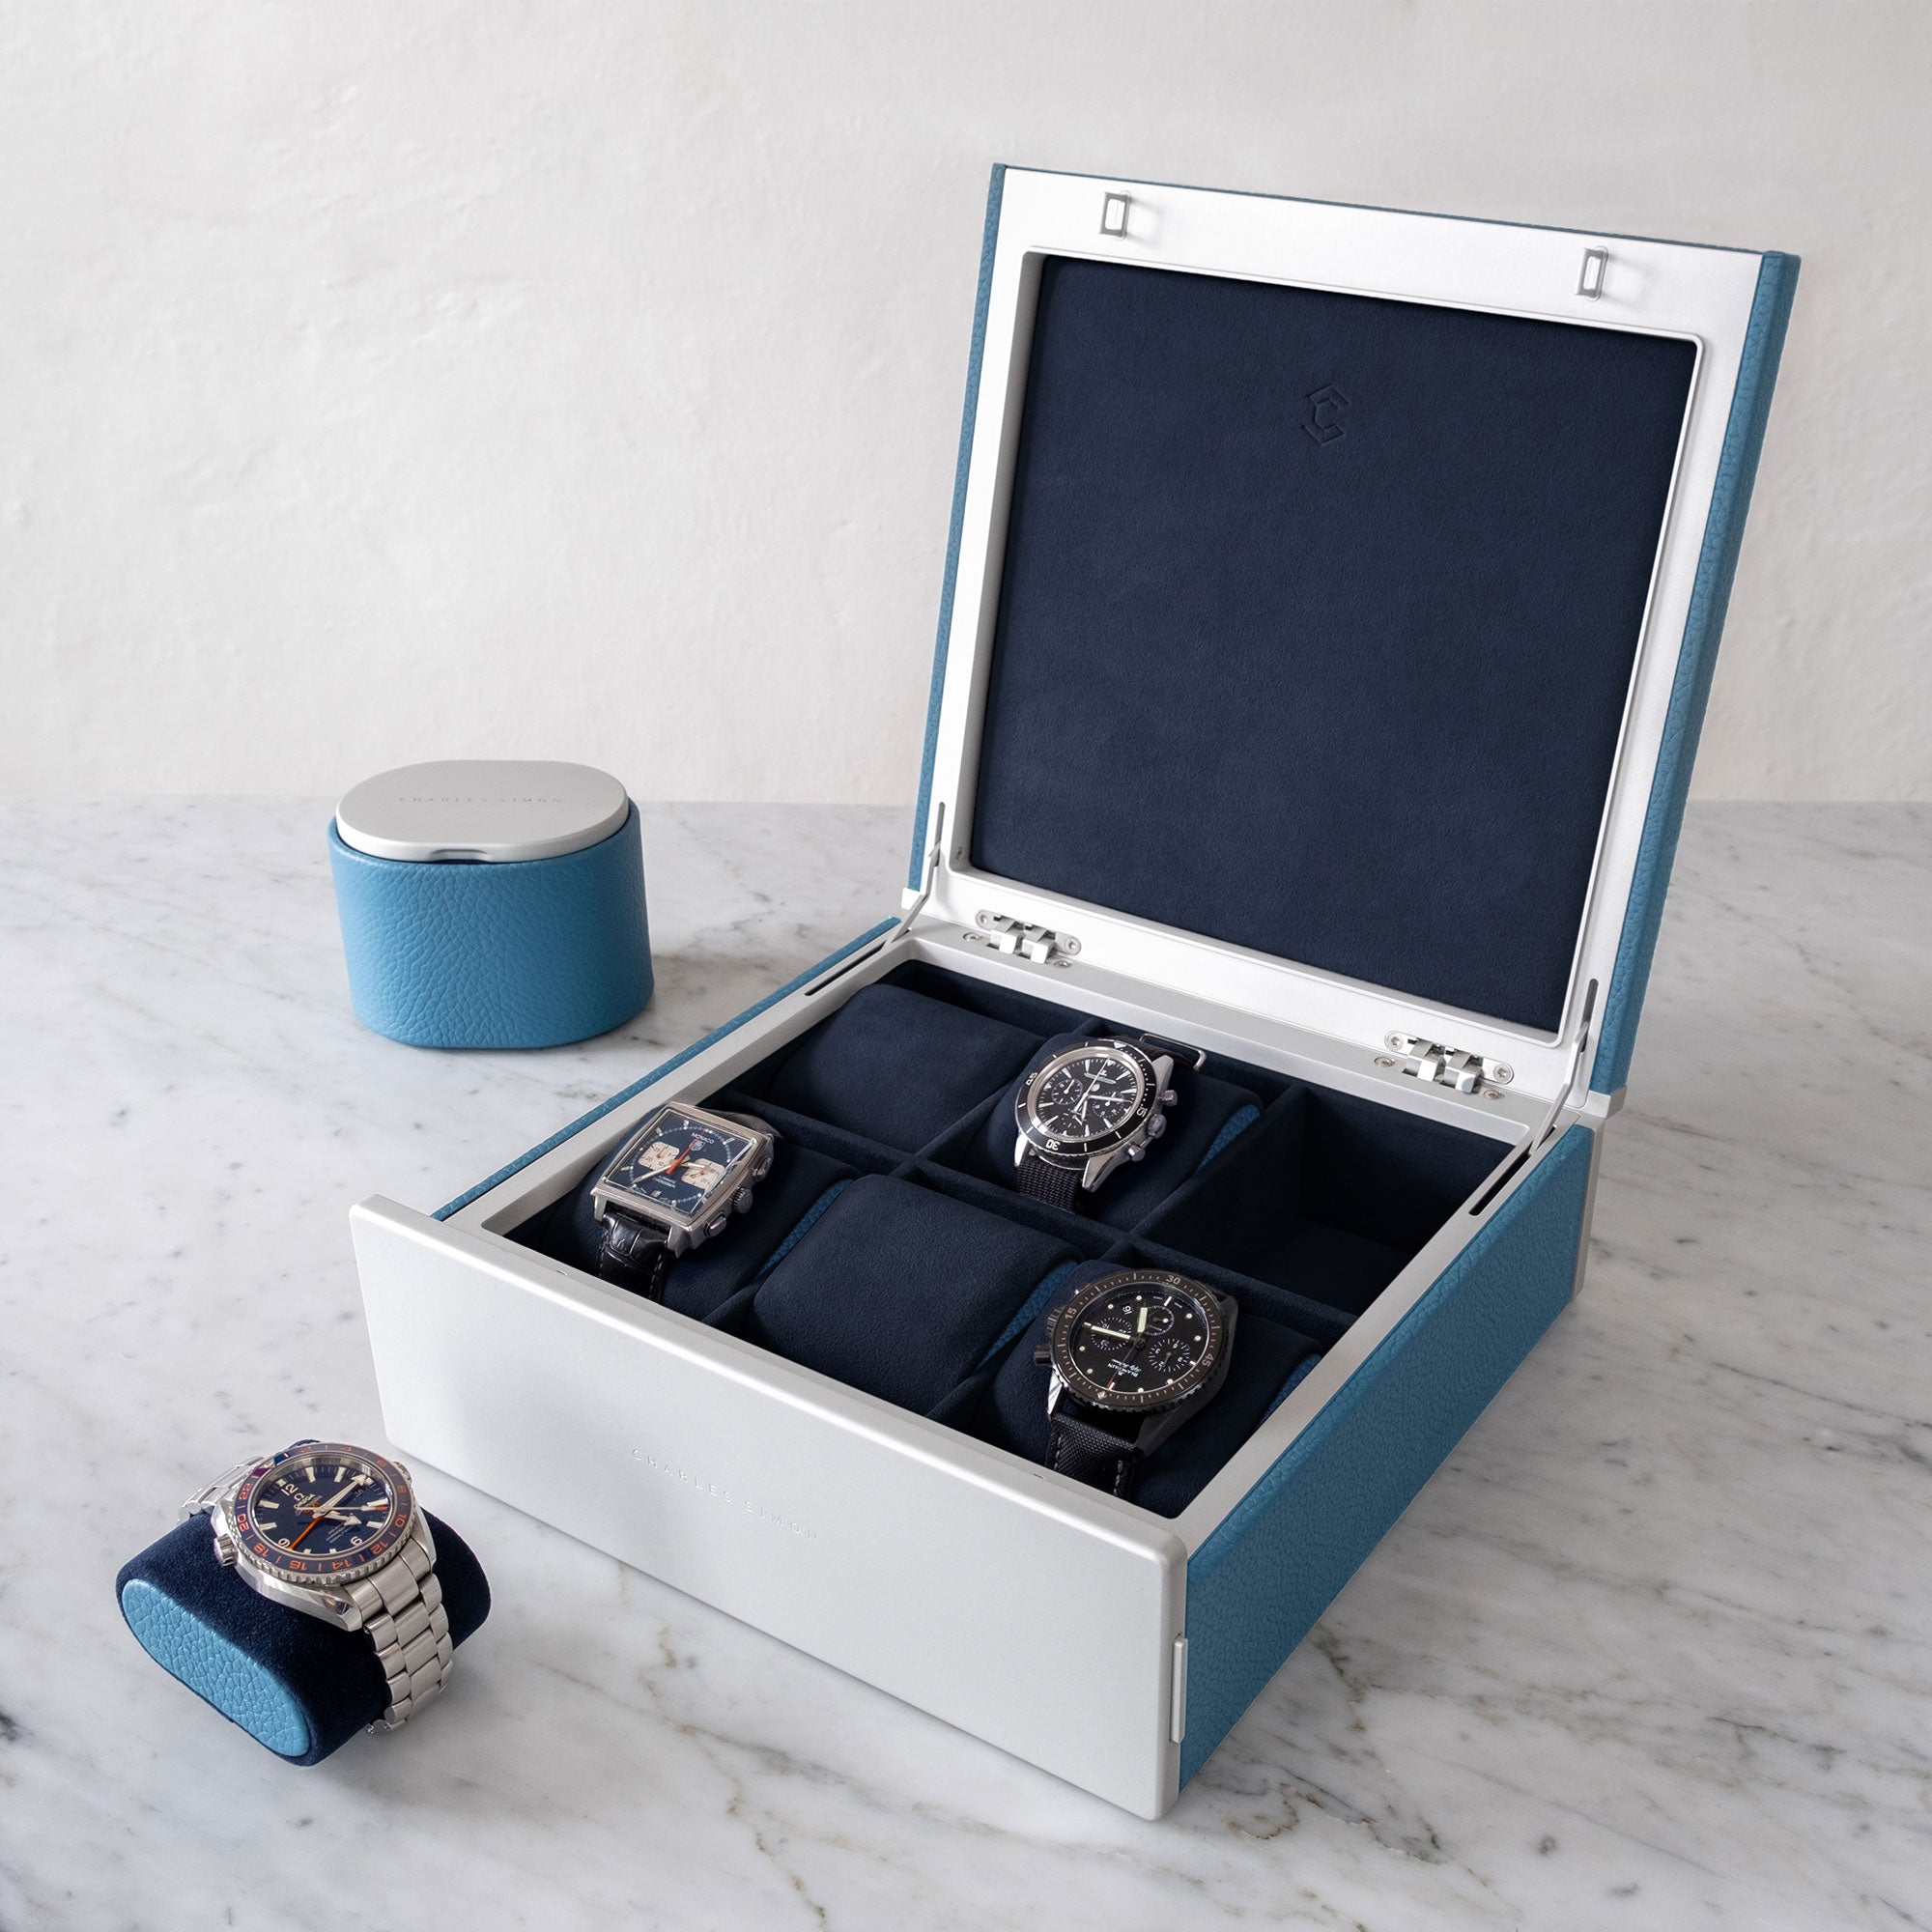 Lifestyle photo of open Spence watch box in sky blue French leather storing luxury men's watches from Rolex, Omega, Jaeger Lecoultre and Tag Heuer. Omega Seamaster is placed in front of designer watch box on watch cushion with sky blue leather sides. Closed Theo watch roll in sky blue is placed in the background.